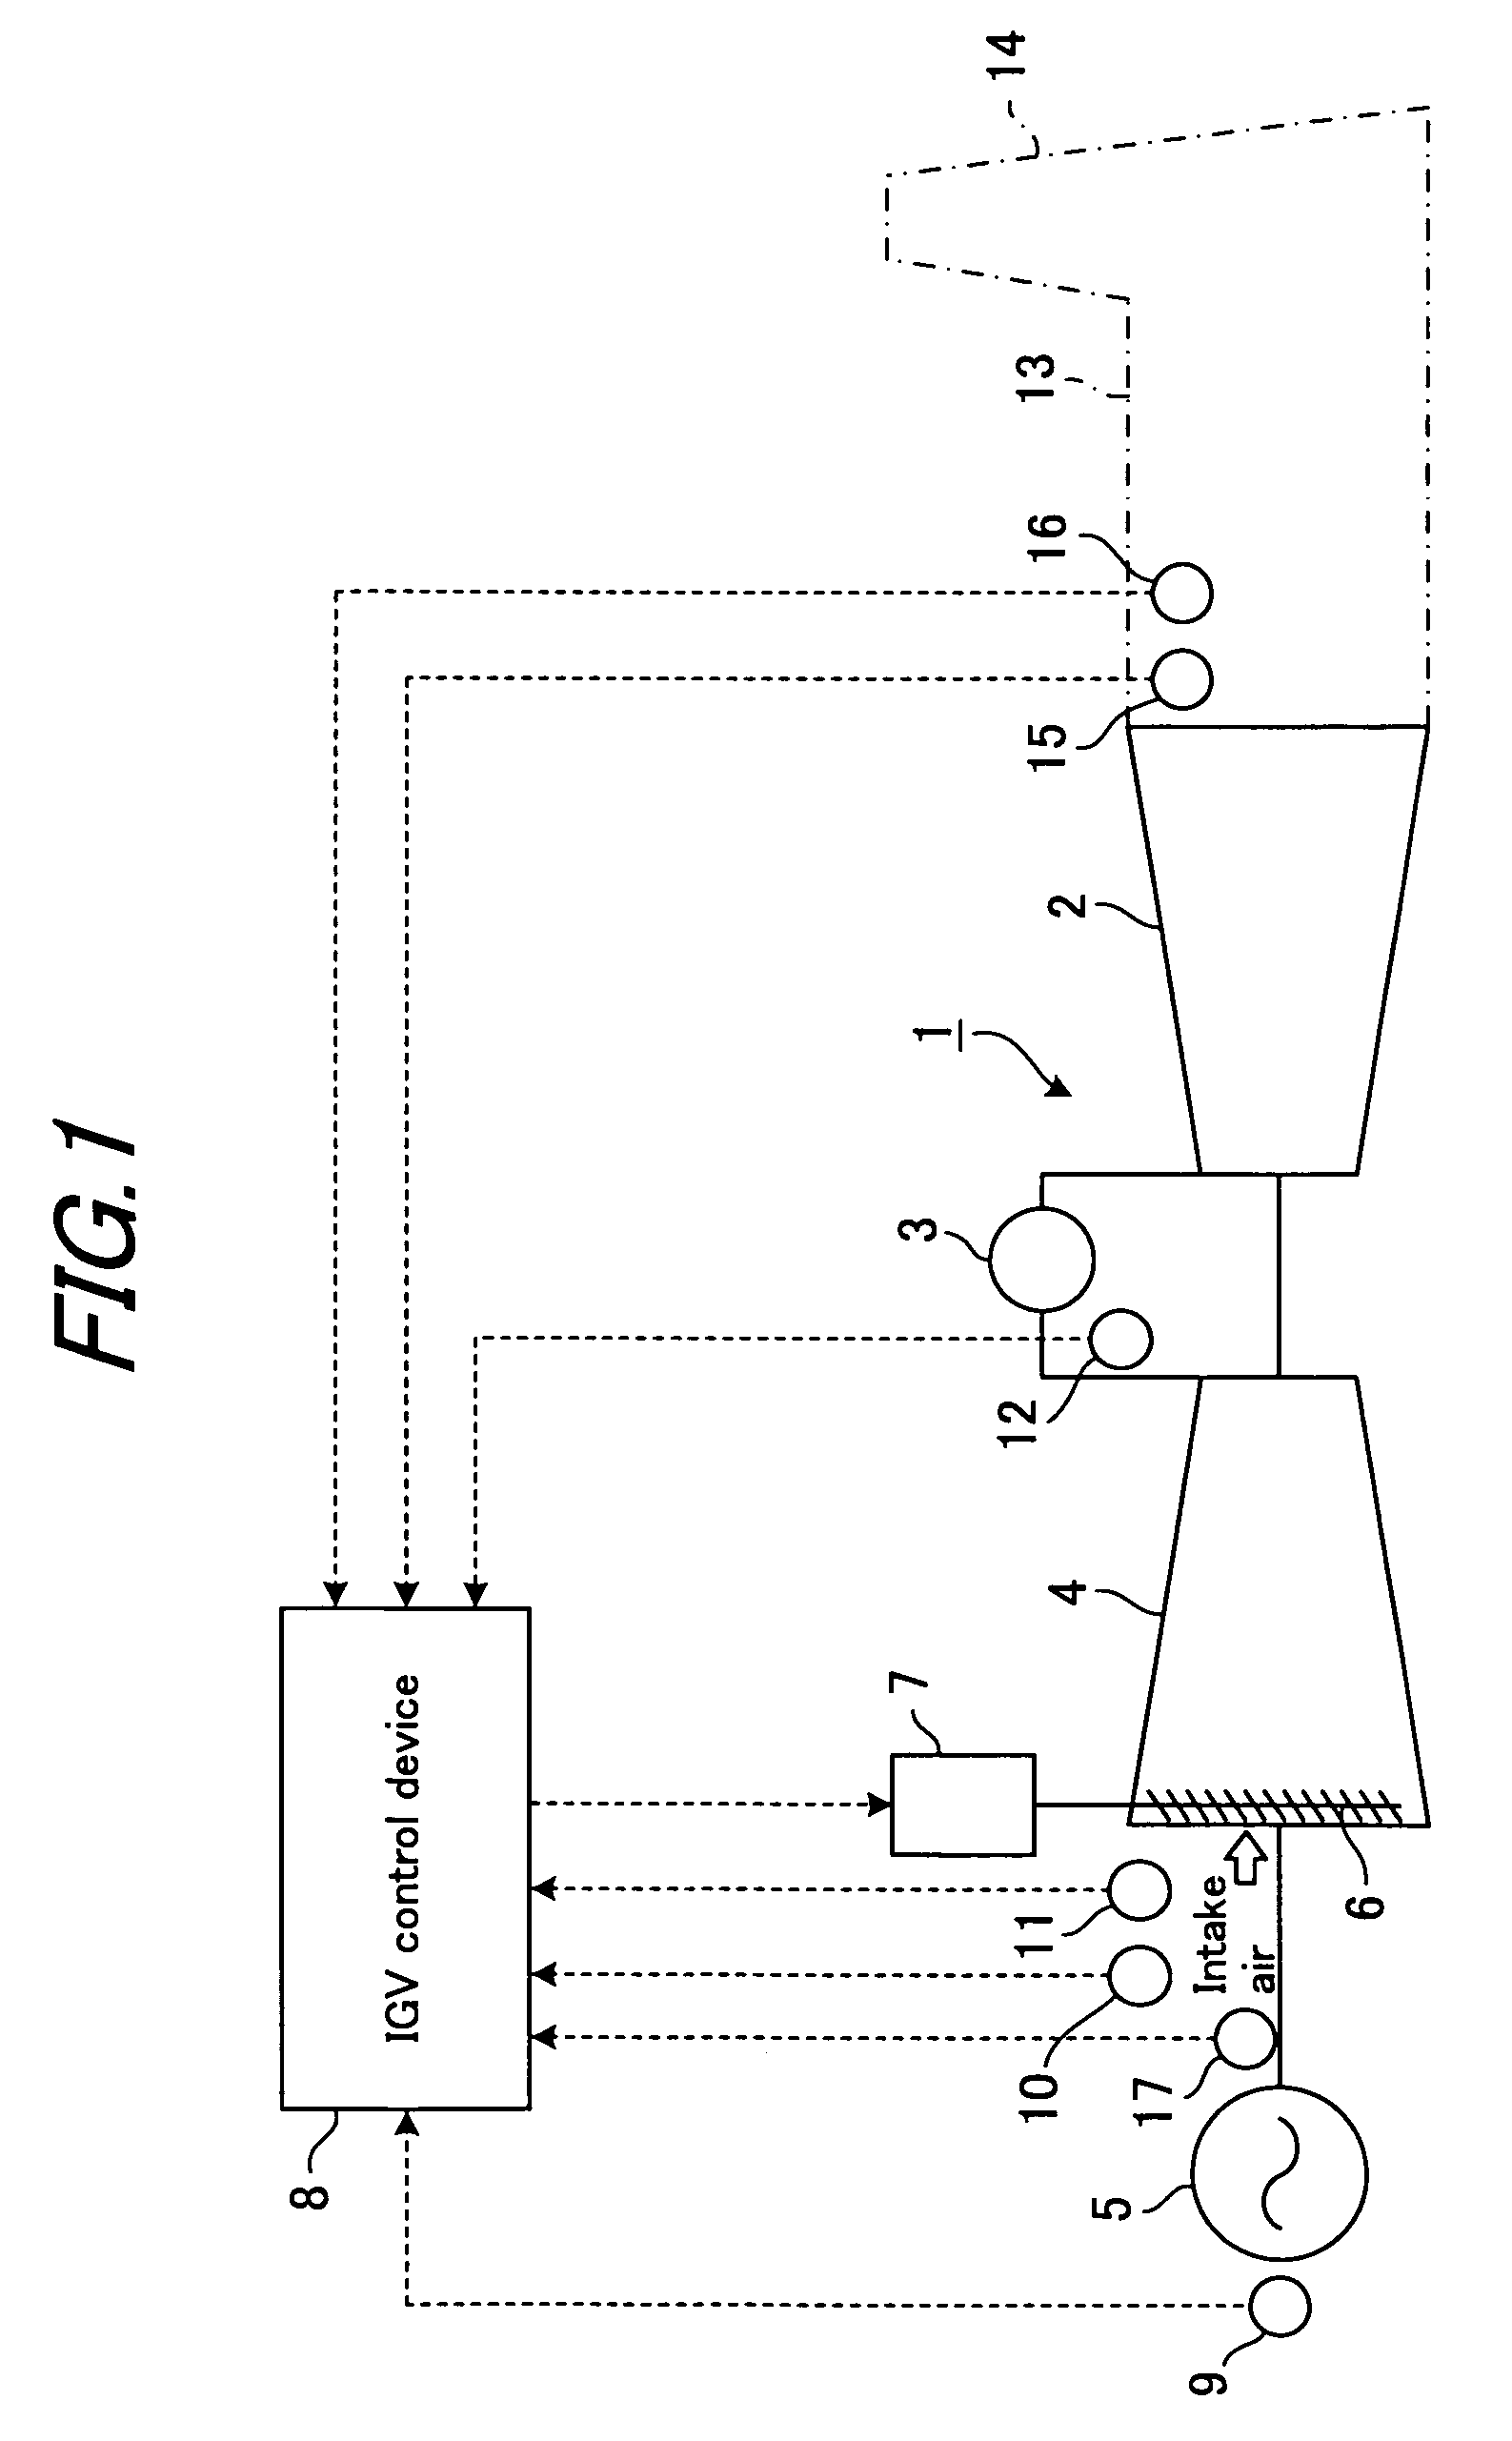 Inlet guide vane control device of gas turbine